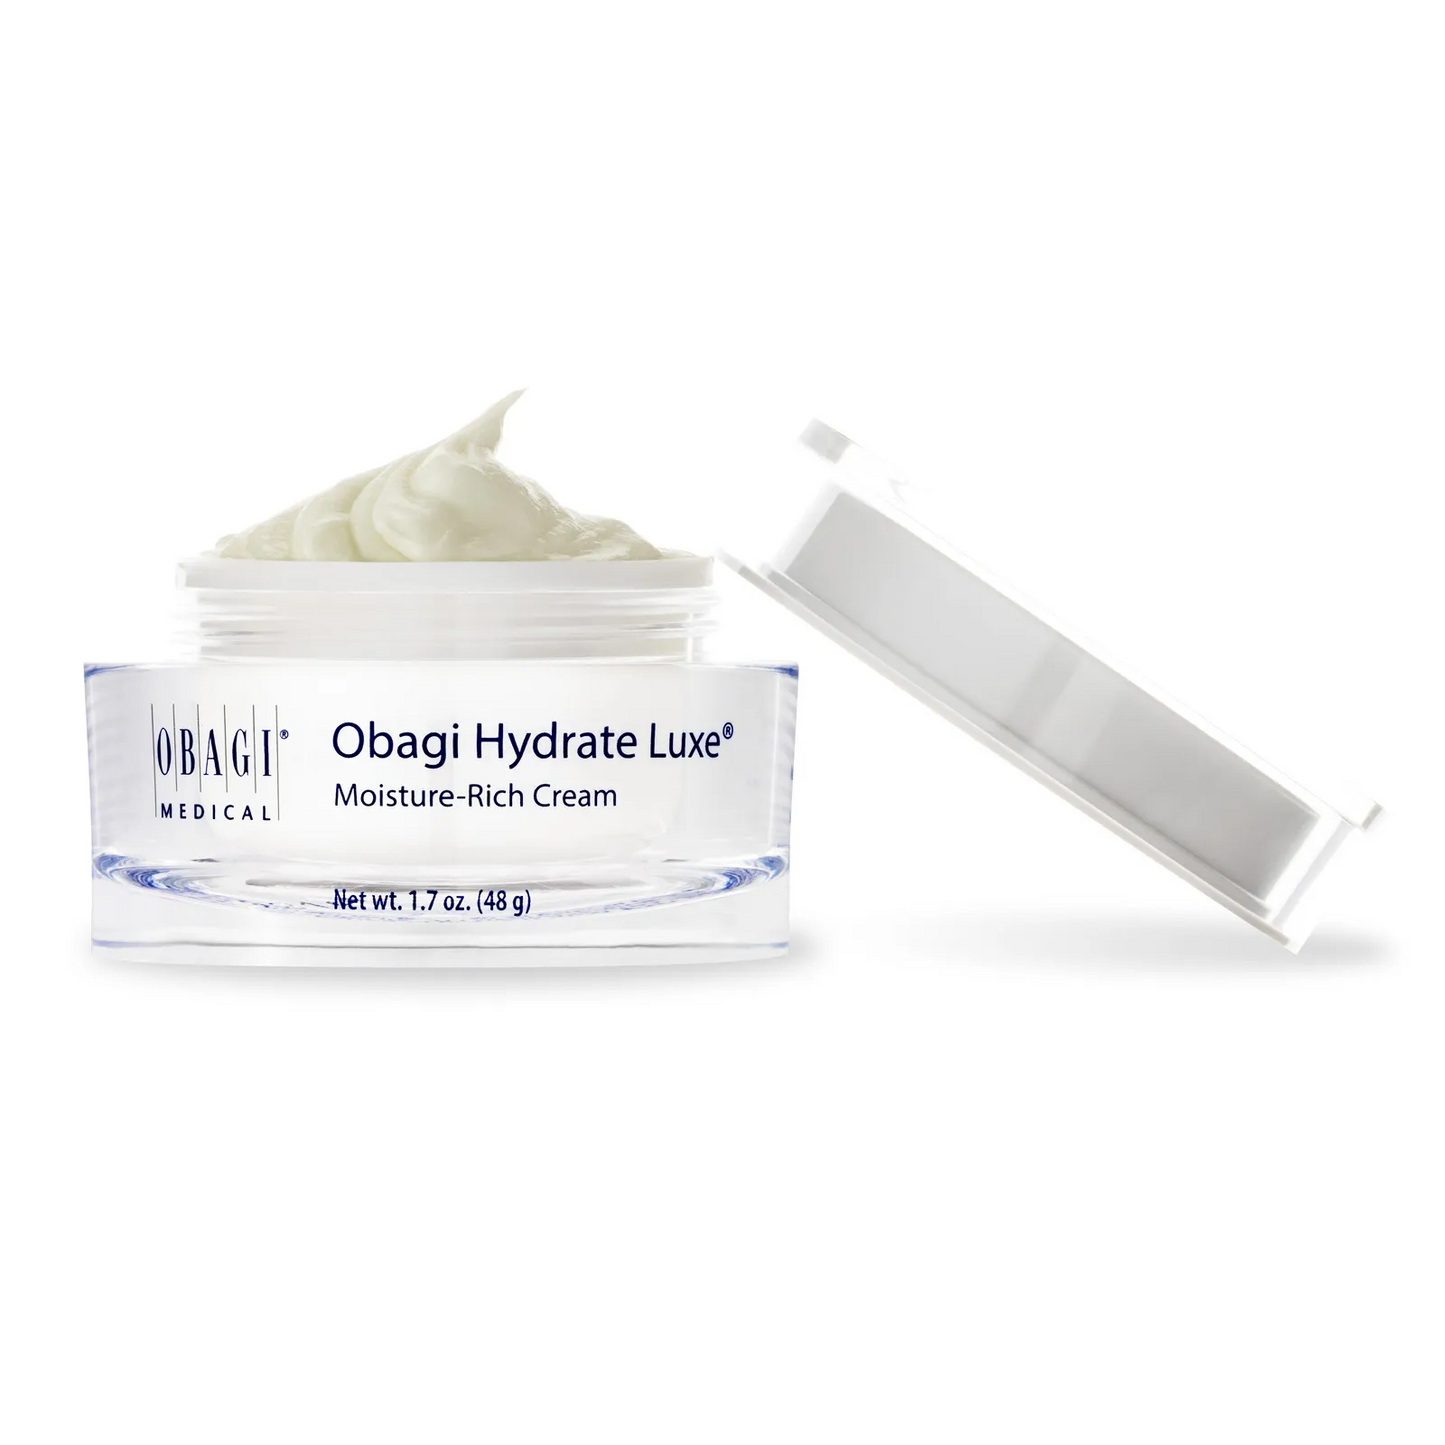 OBAGI HYDRATE LUXE 48G / 1.7 OZ.